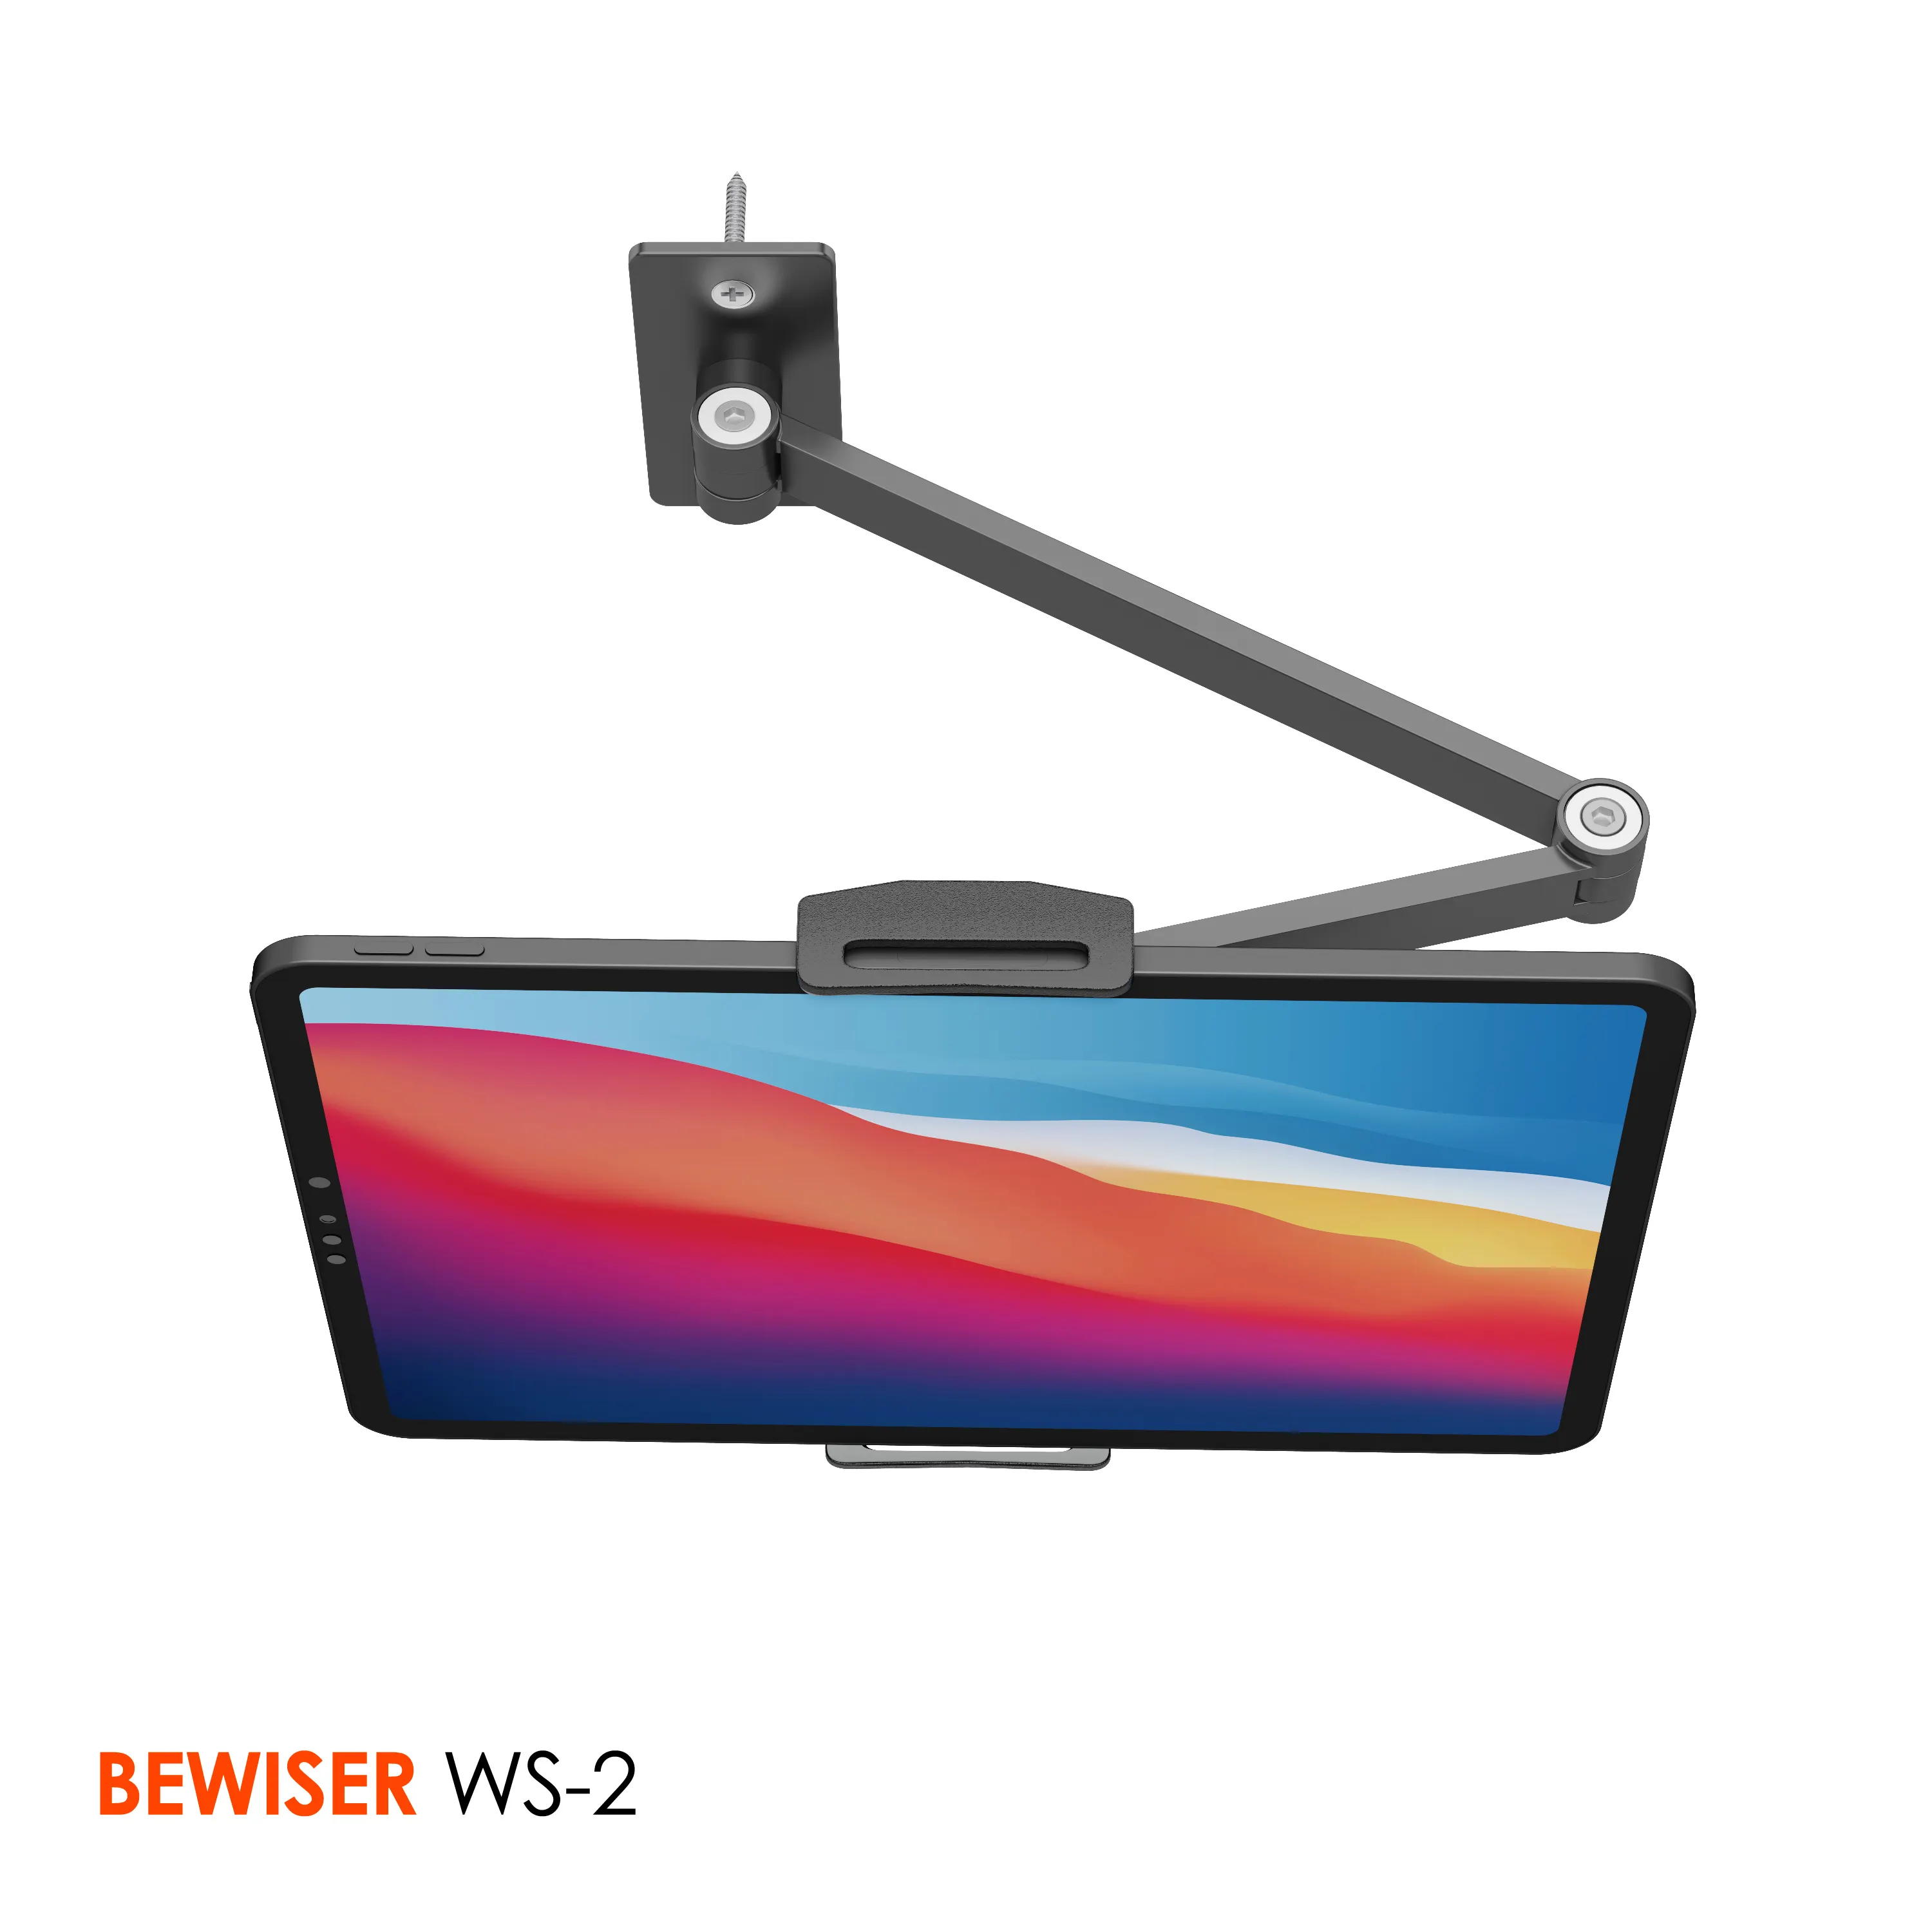 Phone Display Stand Phone Stand For Live Streaming Display Stand For Watches BEWISER WS-2